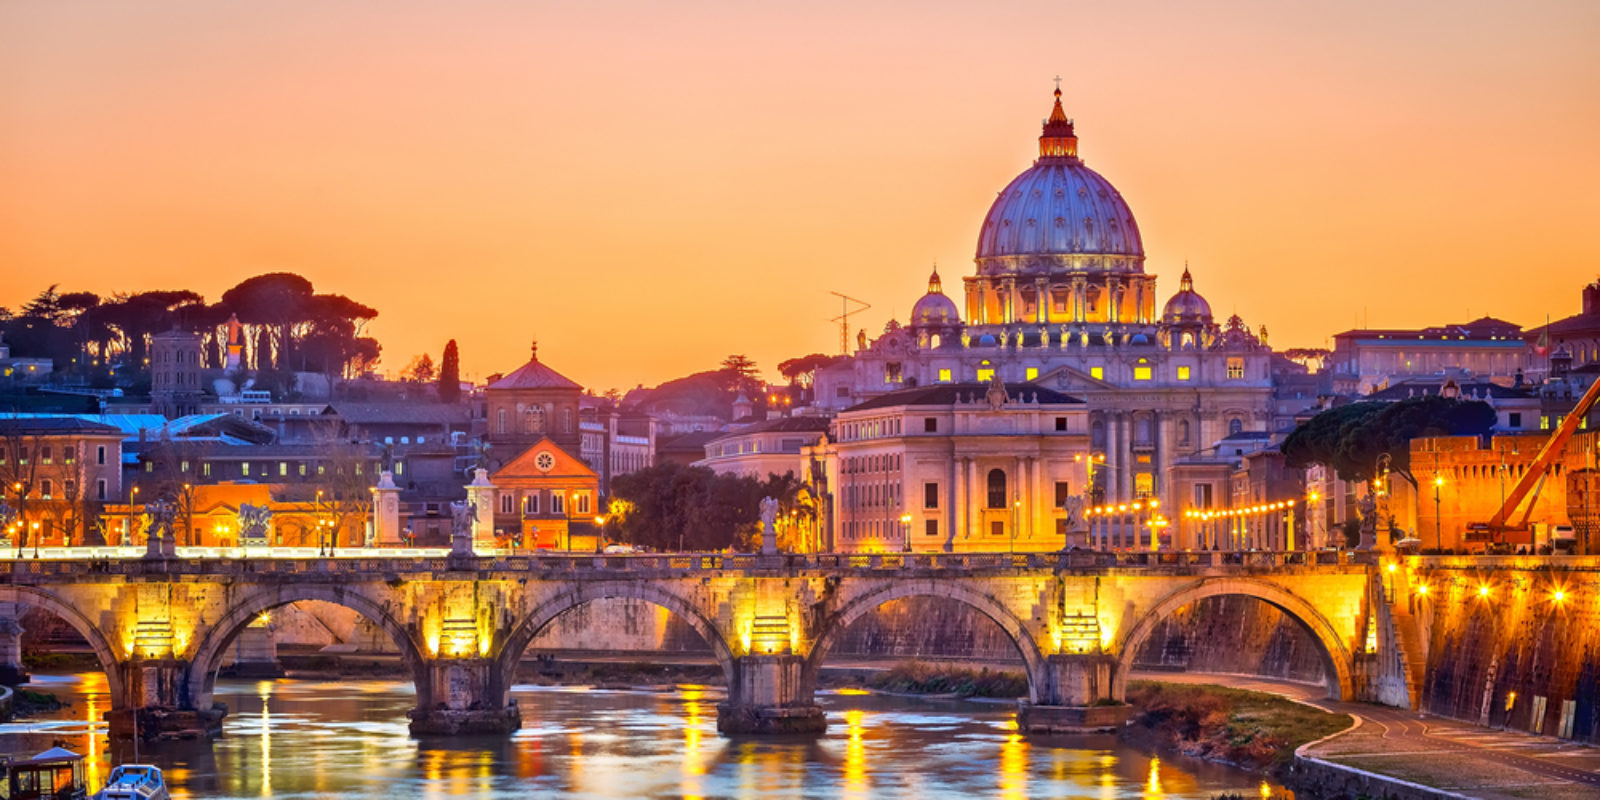 Rome, Italy is a great first-time-to-Europe destination! With incredible history & architecture, rugged hiking trails, and delicious food, there's something for..